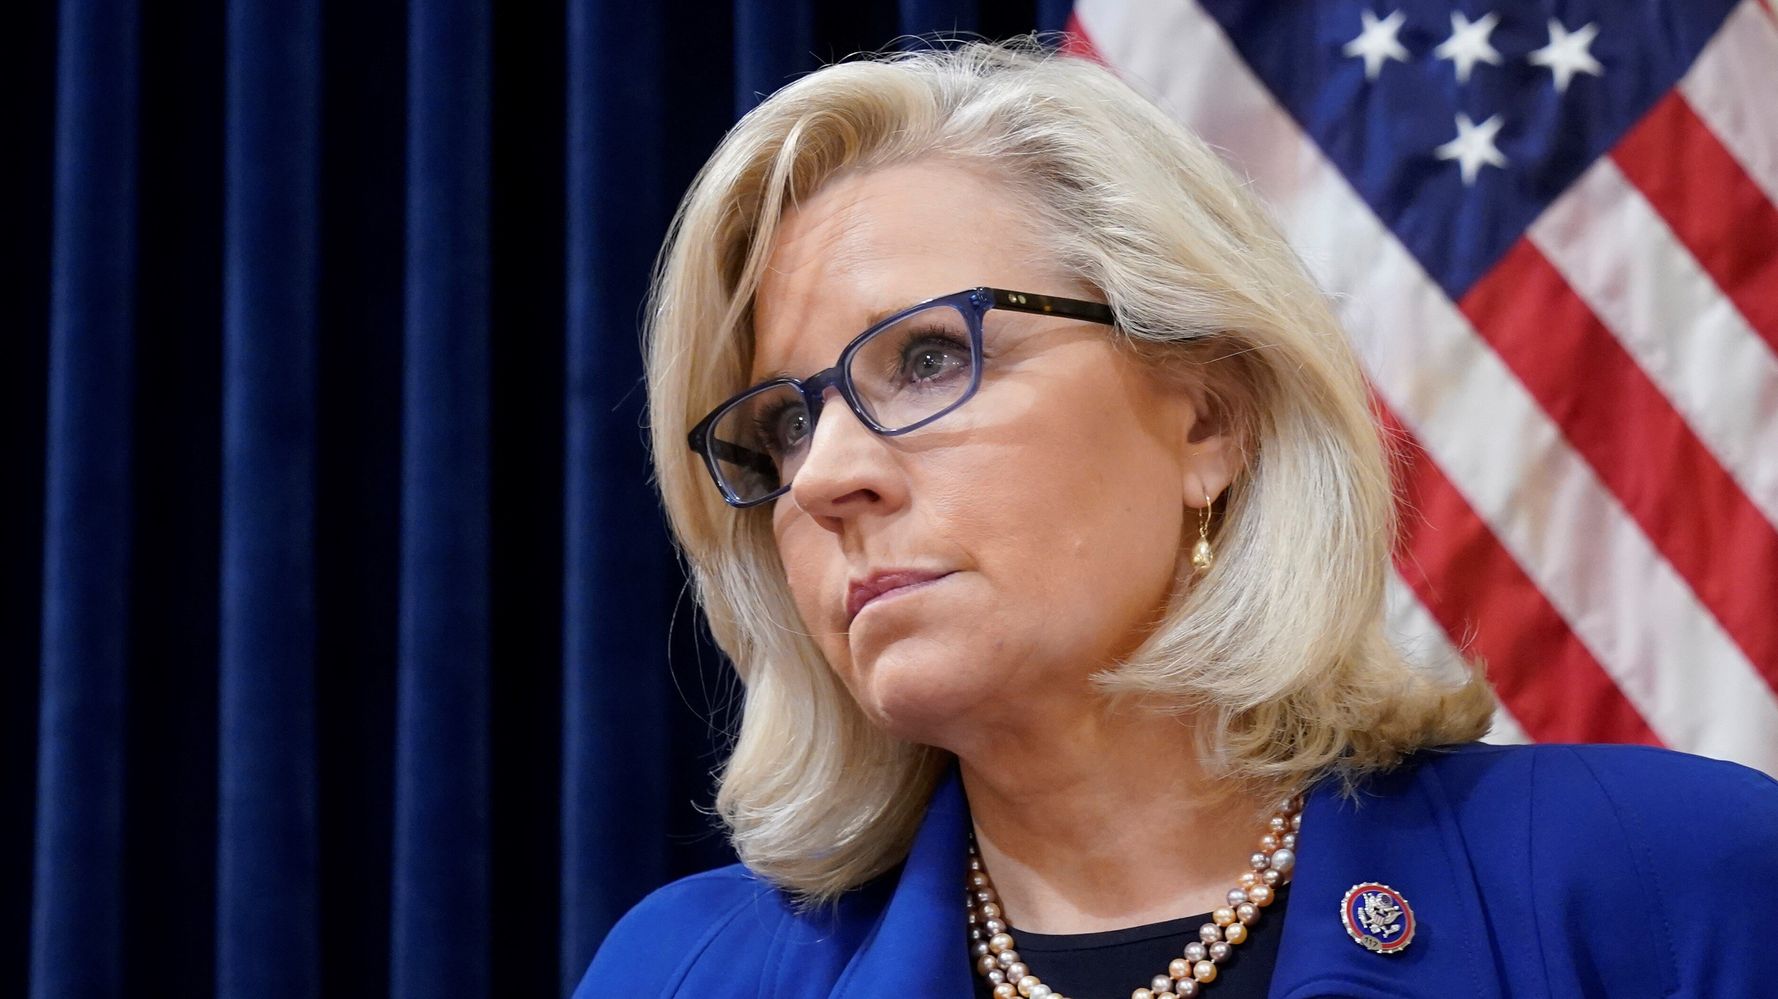 Liz Cheney: Many GOP Lawmakers Have Privately Encouraged My Stand Against Trump